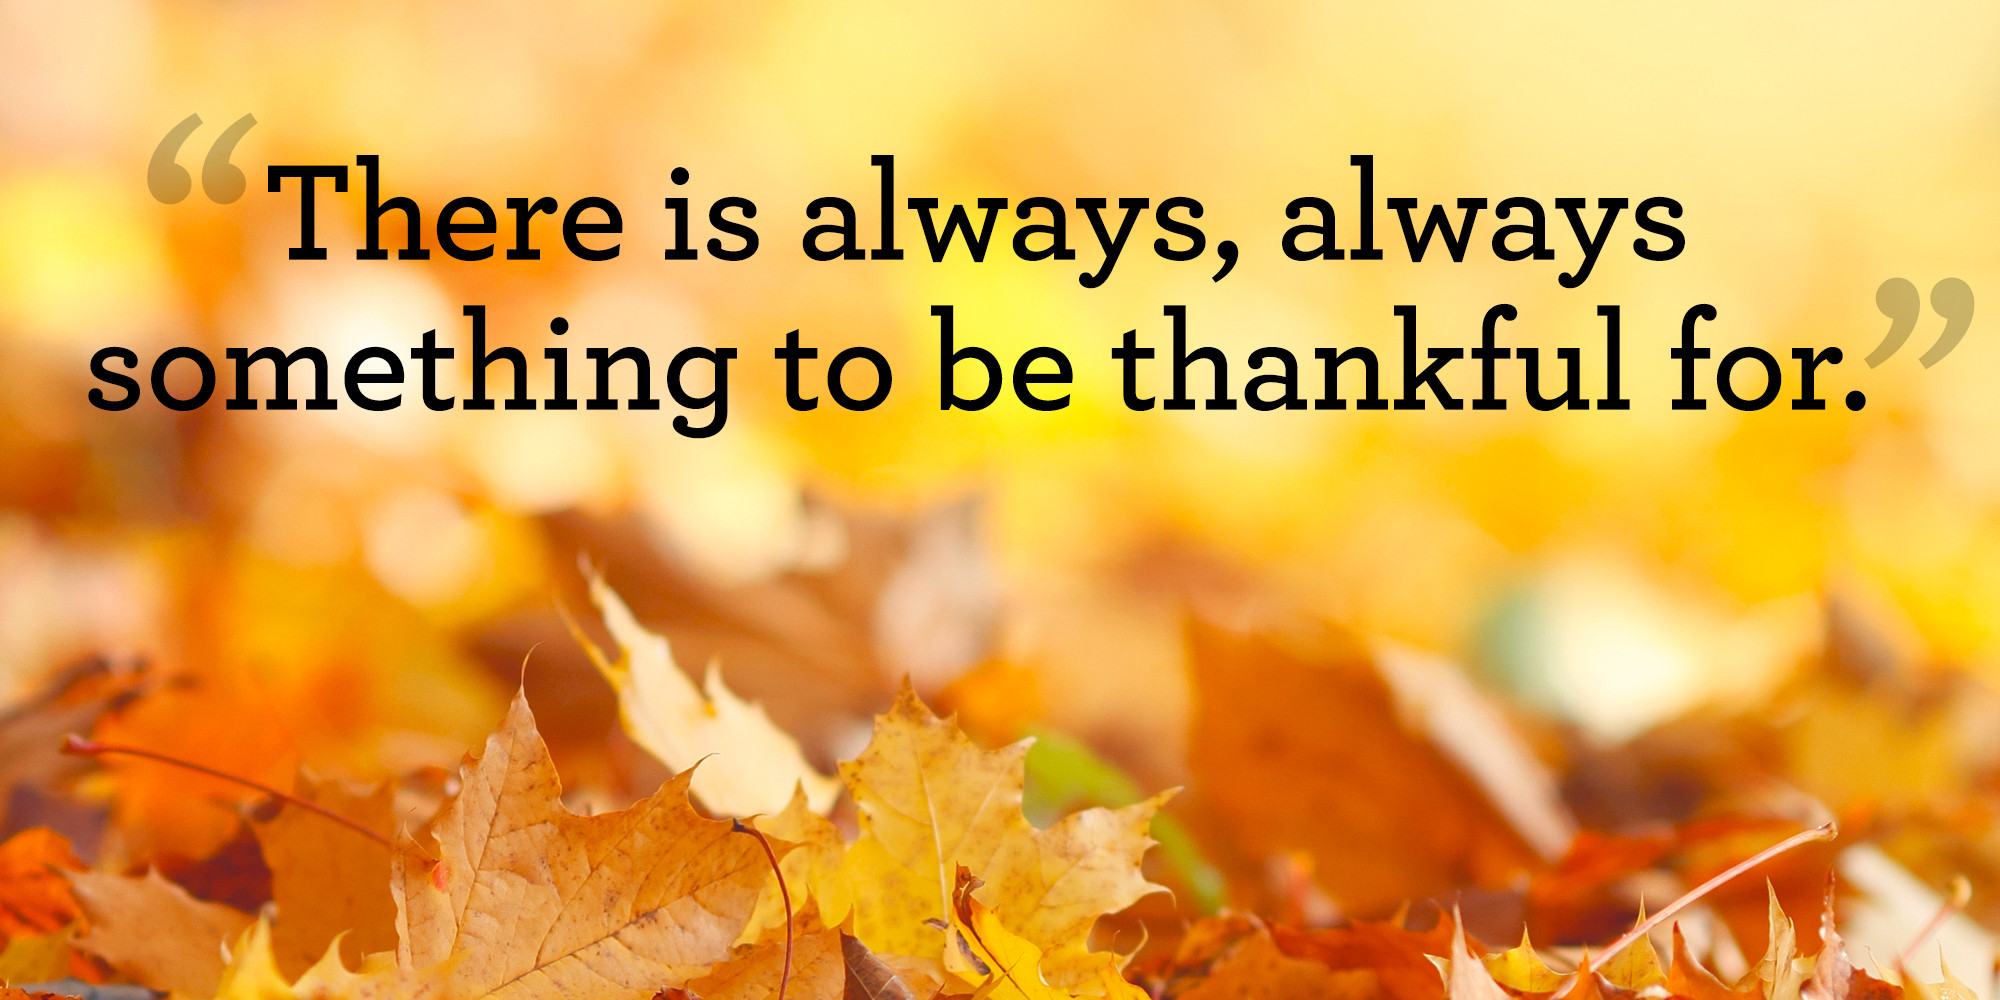 Quotes For Thanksgiving
 10 Best Thanksgiving Quotes Meaningful Thanksgiving Sayings